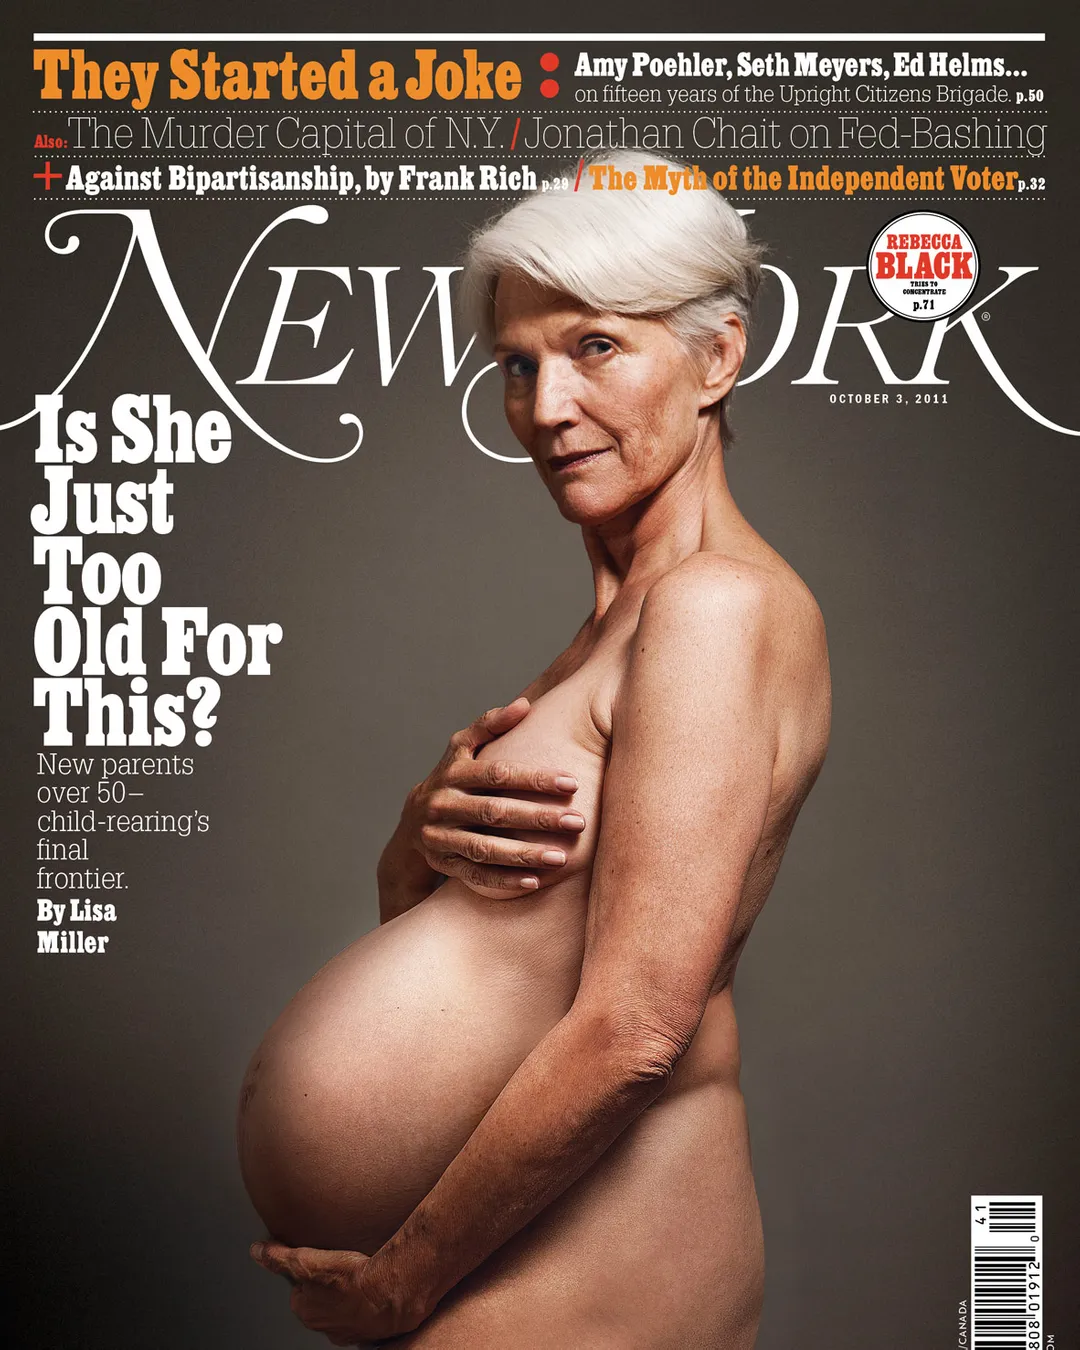 aged parents cover story by lisa miller